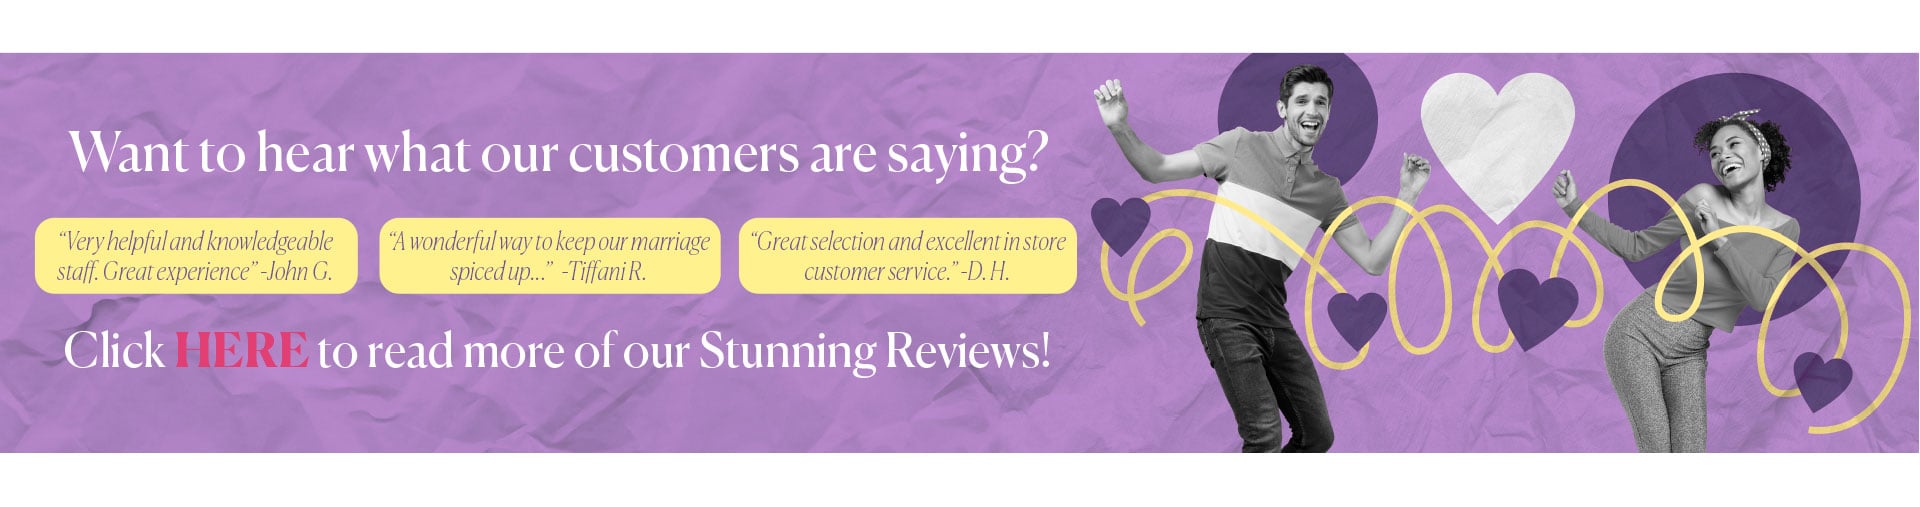 Want to hear what our customers are saying? - Click HERE to read more of our Stunning Reviews!